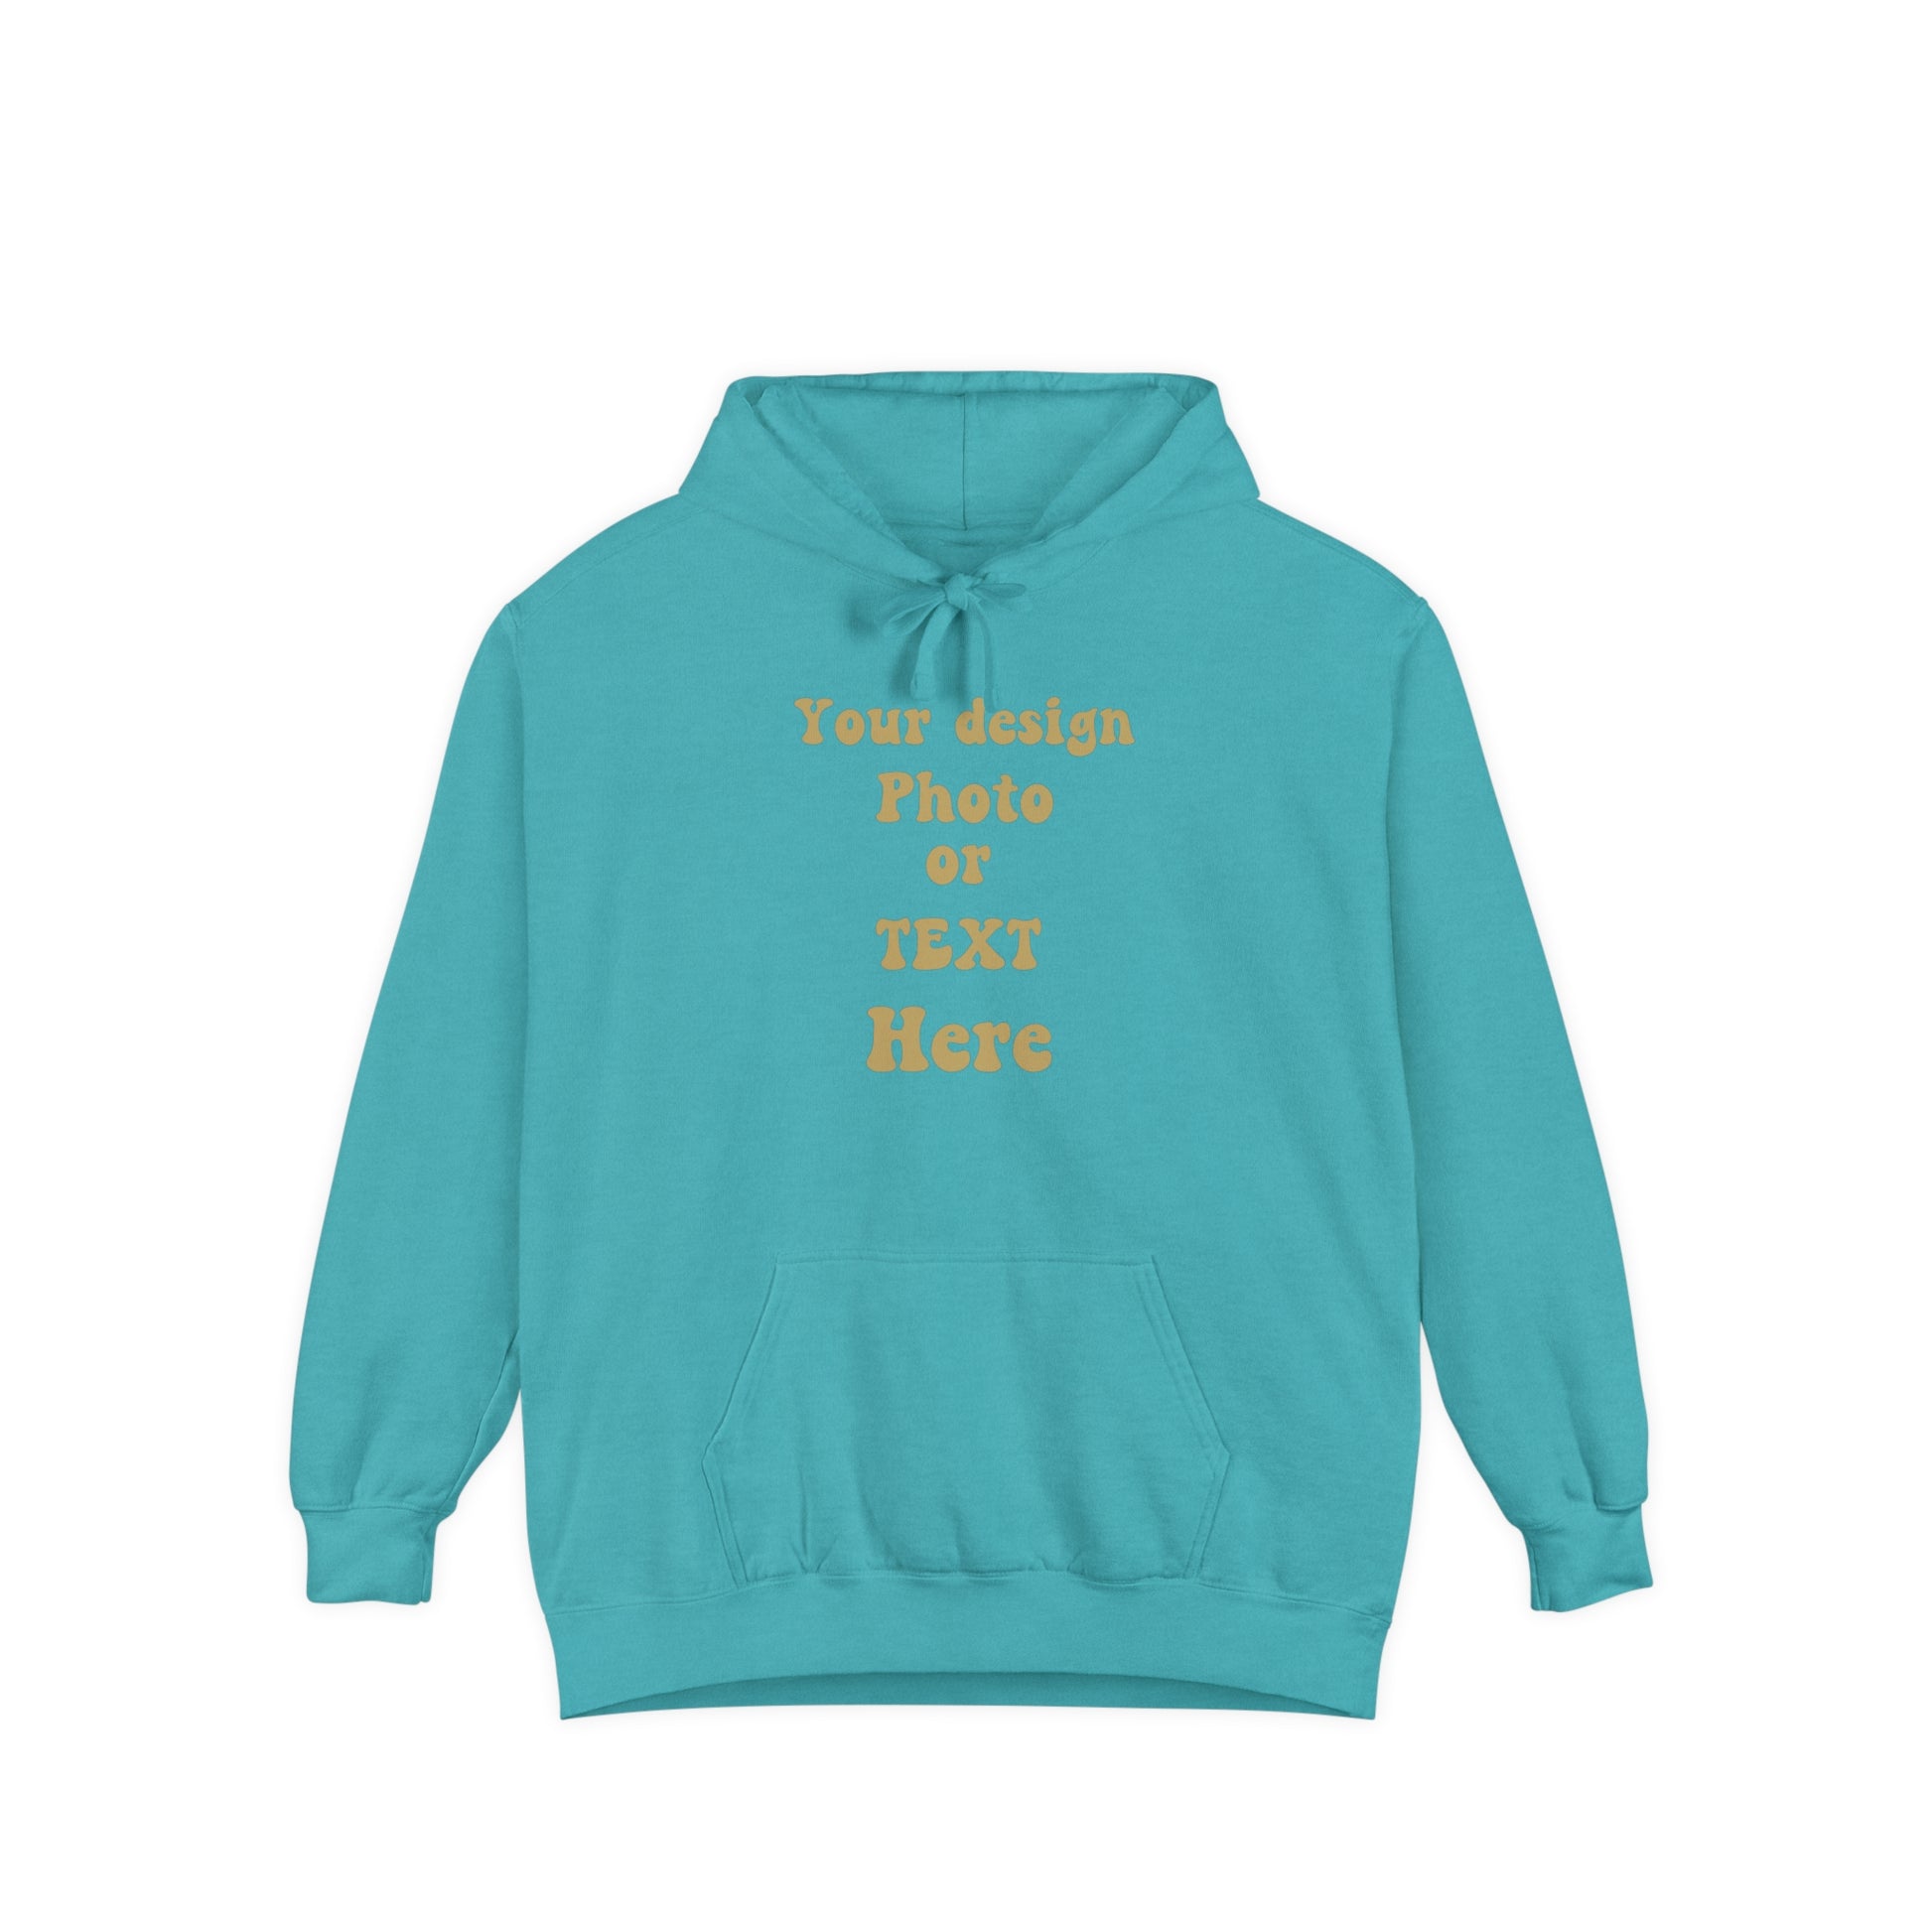 Luxury Hoodie - Personalize with Your Design, Photo, or Text | Greatest Comfort Hoodie Seafoam S 